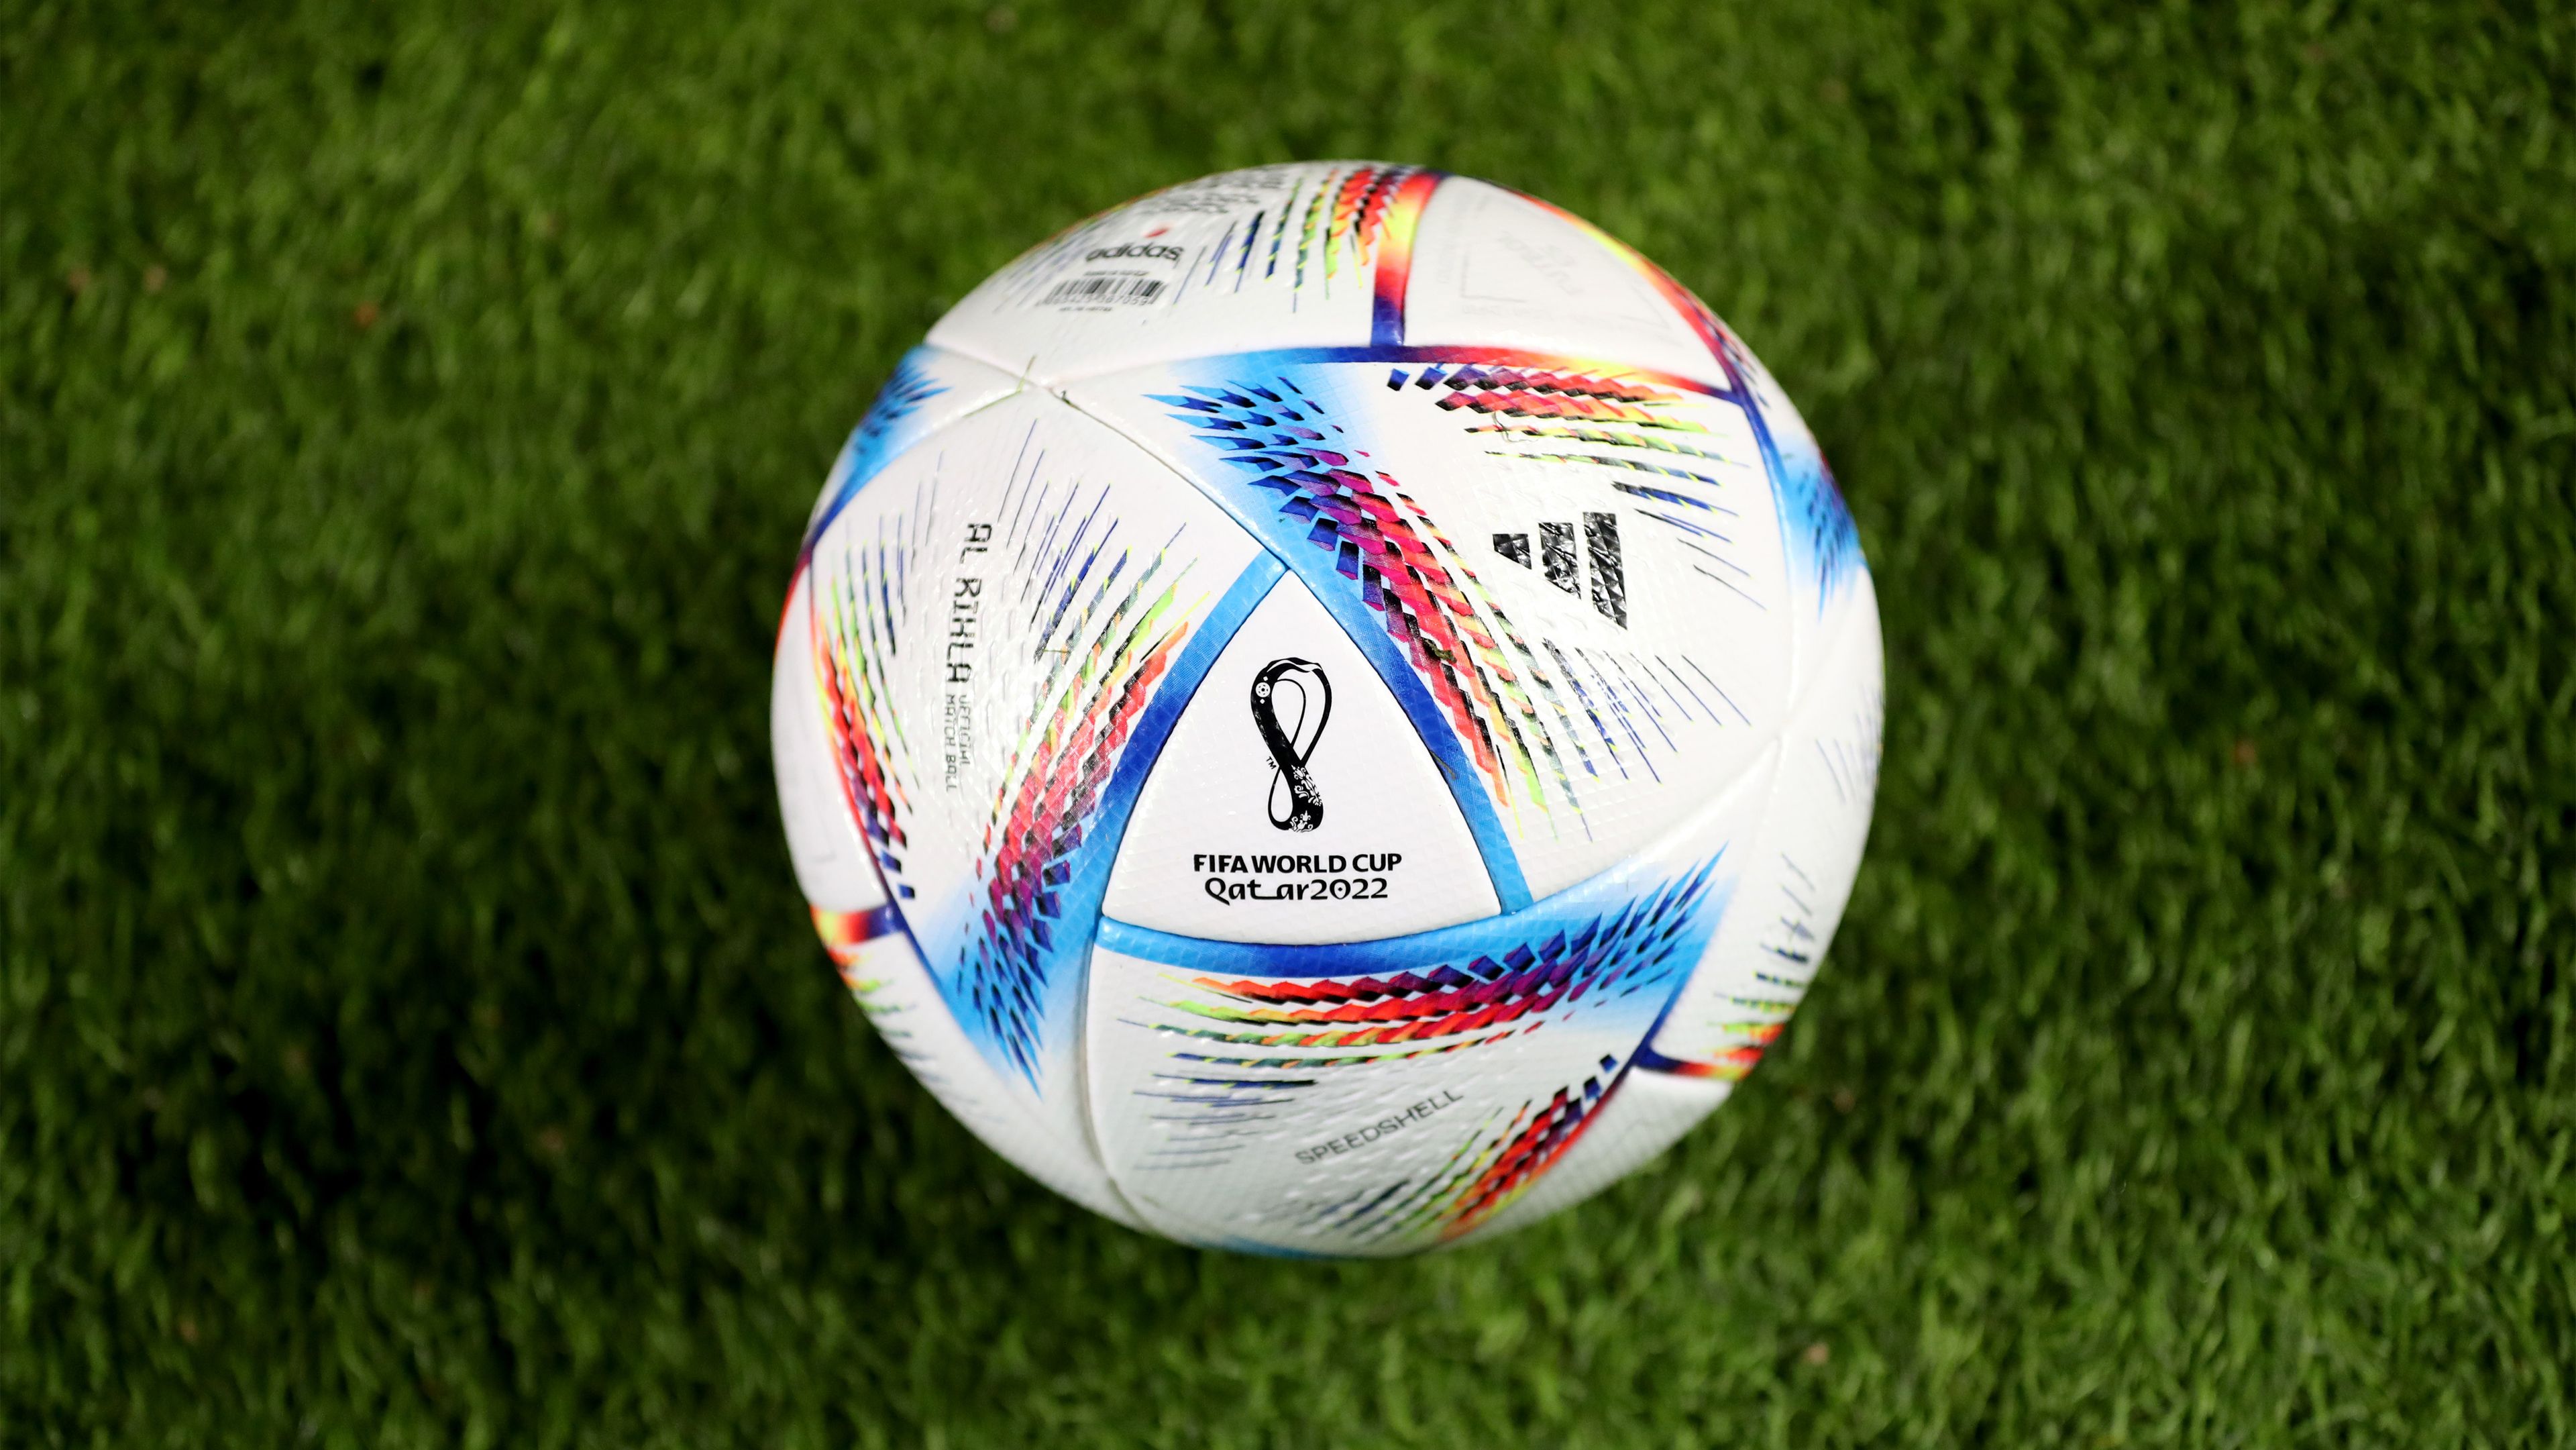 The official ball of FIFA World Cup Qatar 2022 is seen during the friendly football match between Portugal and Nigeria, at the Alvalade stadium in Lisbon, Portugal, on November 17, 2022, ahead of the Qatar 2022 World Cup. (Photo by Pedro Fiúza/NurPhoto via Getty Images)